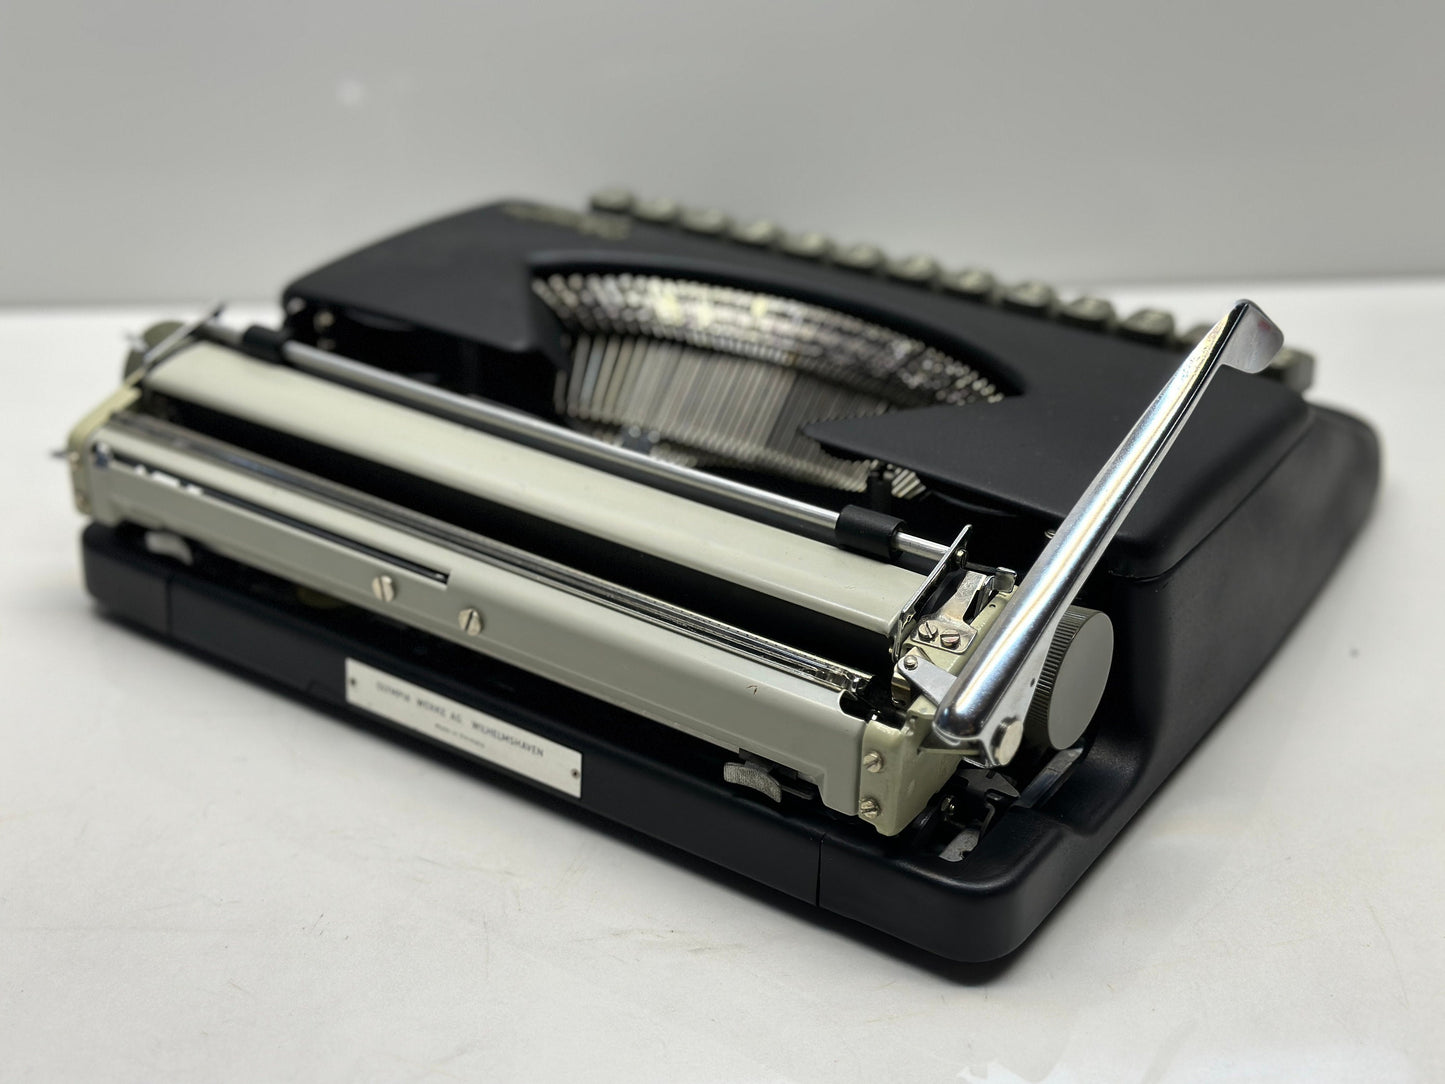 Customized Olympia Splendid 33/66 Typewriter - Black Body, Dual-Color/Single-Color Capability, Refurbished with Black Bag